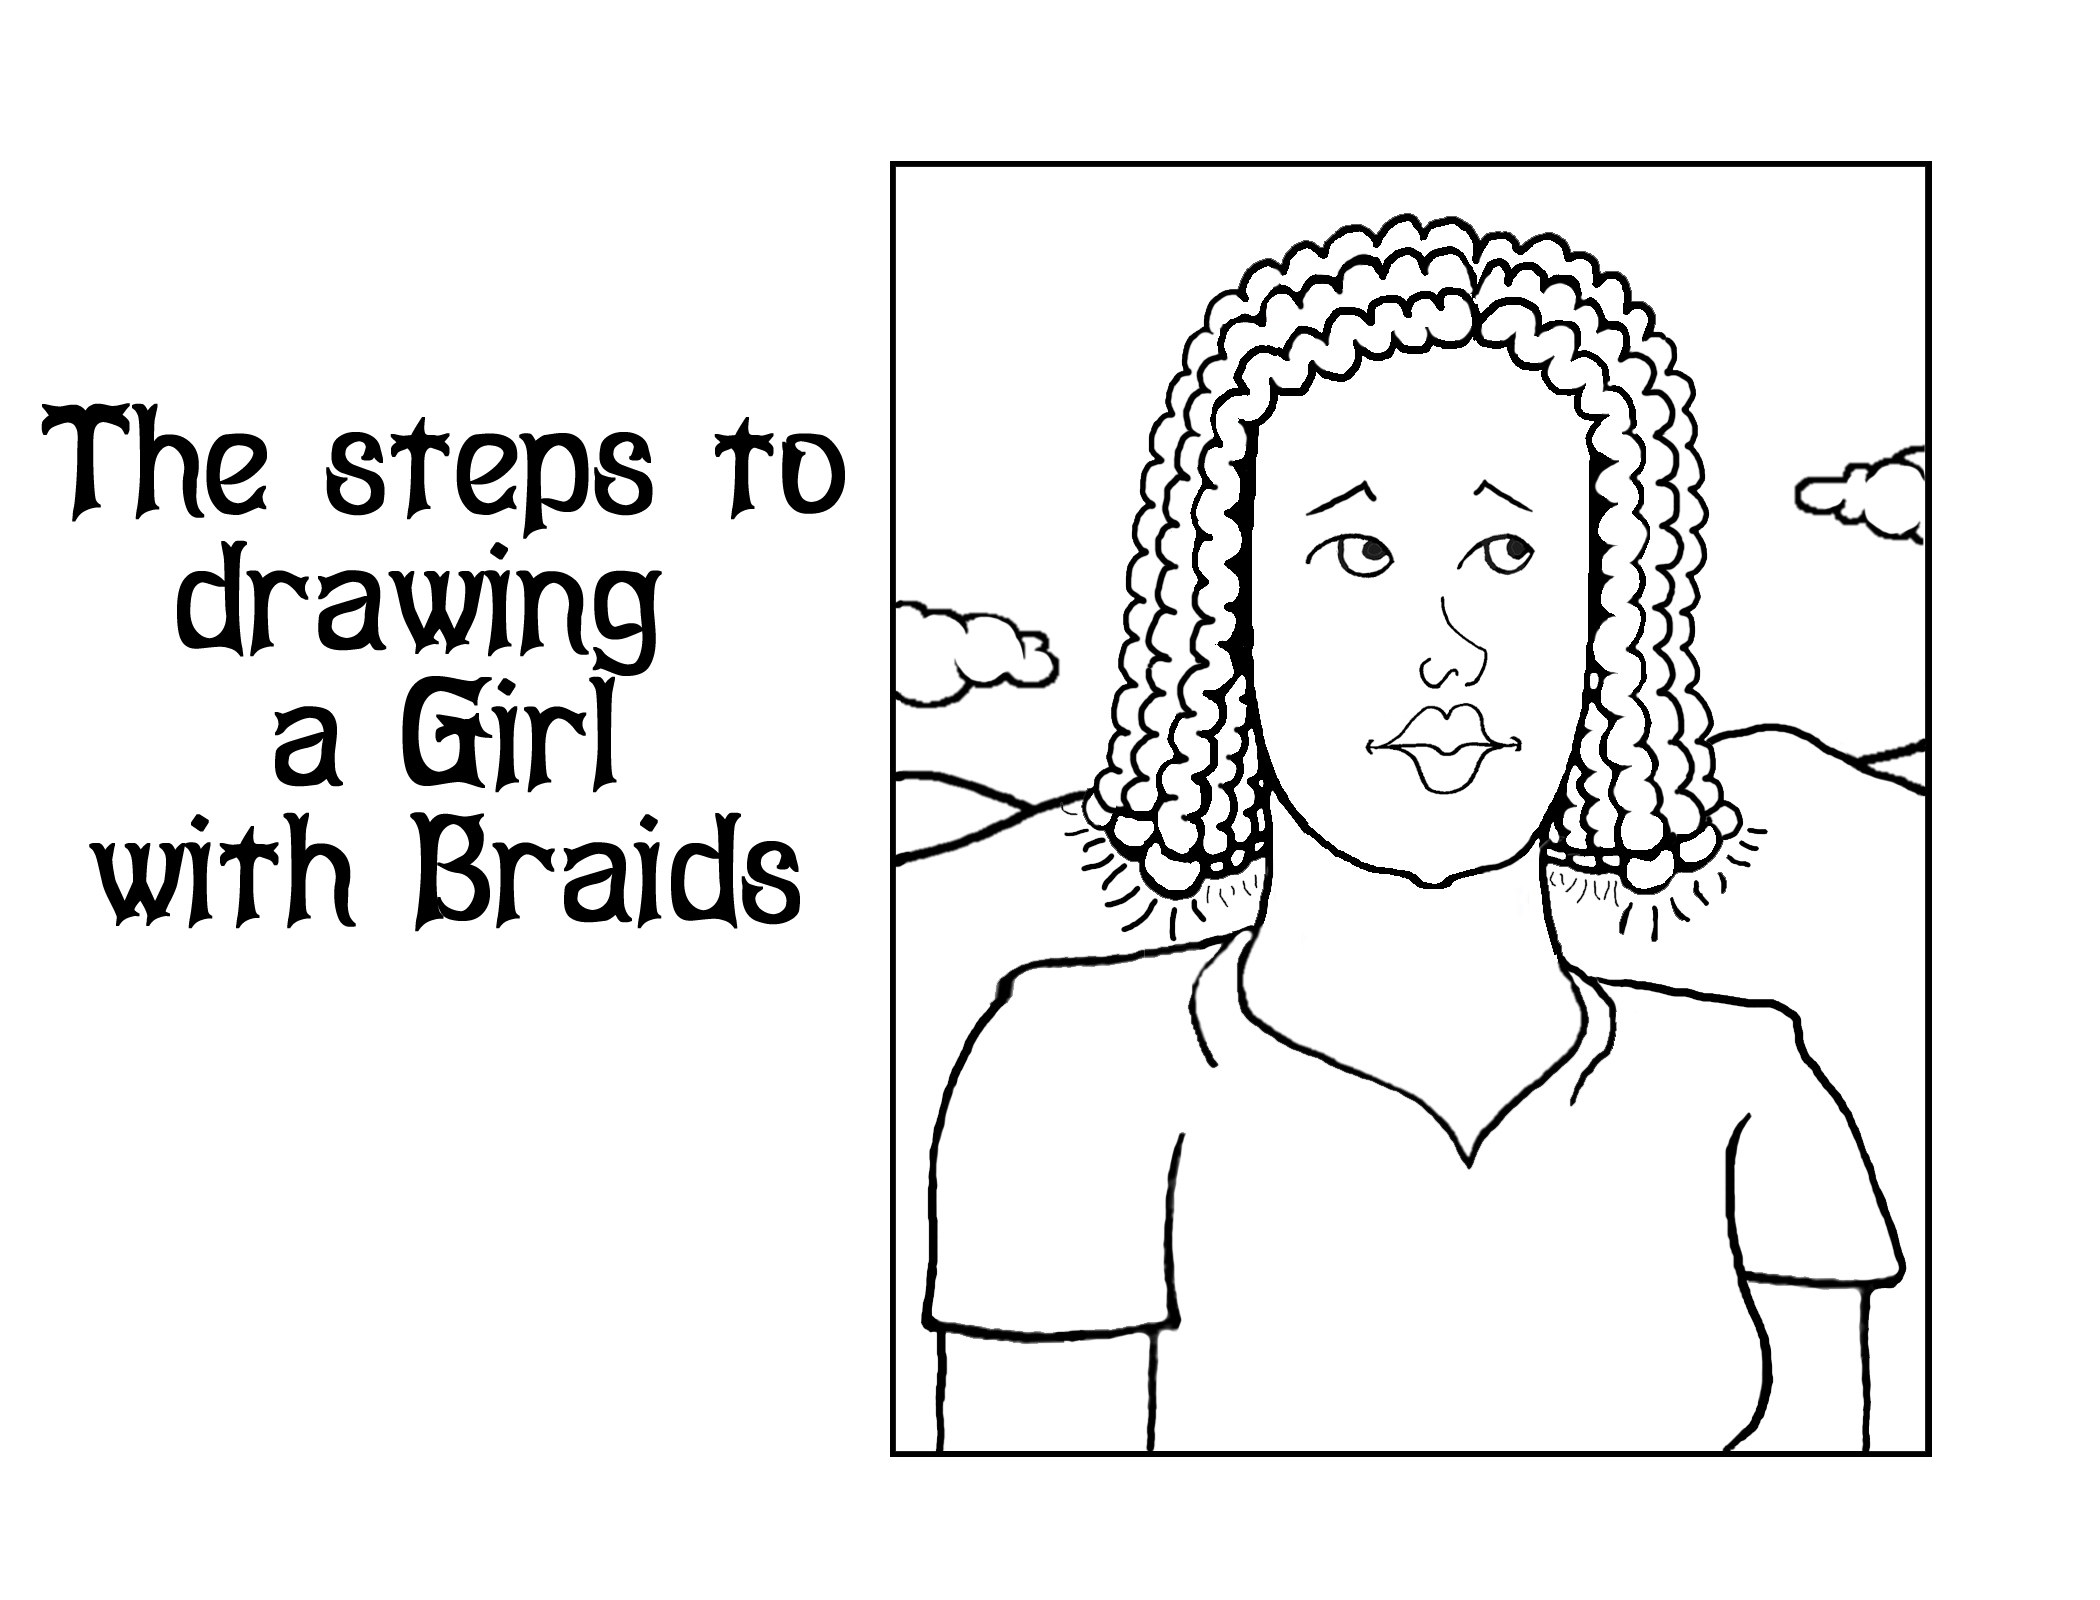 How to draw a girl with braids.